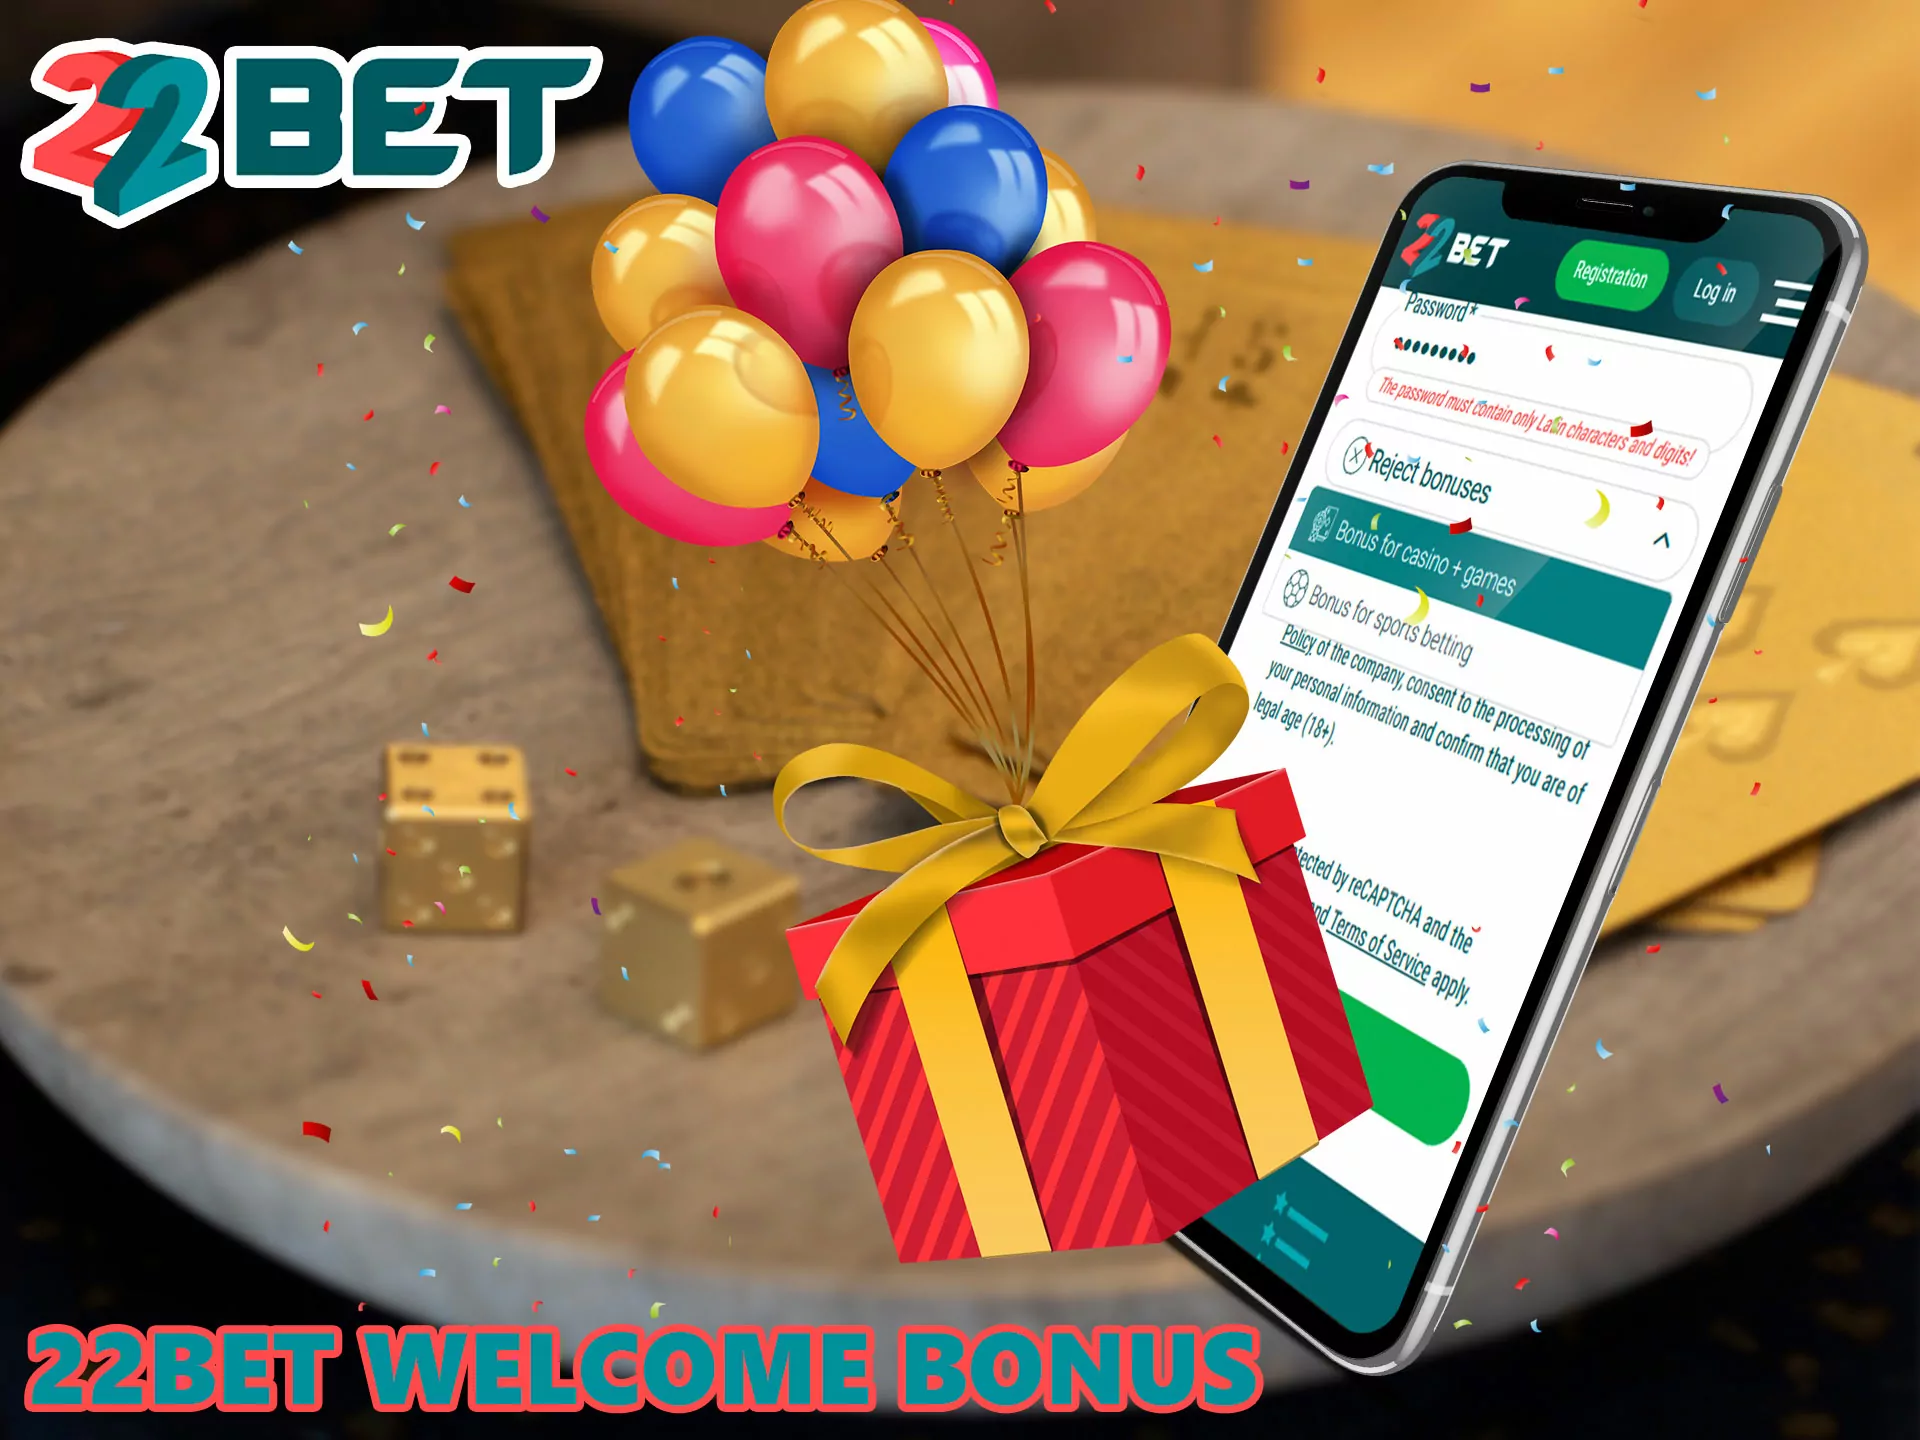 Get up to 10,000 BDT on your balance, just create an account on the bookmaker's website.